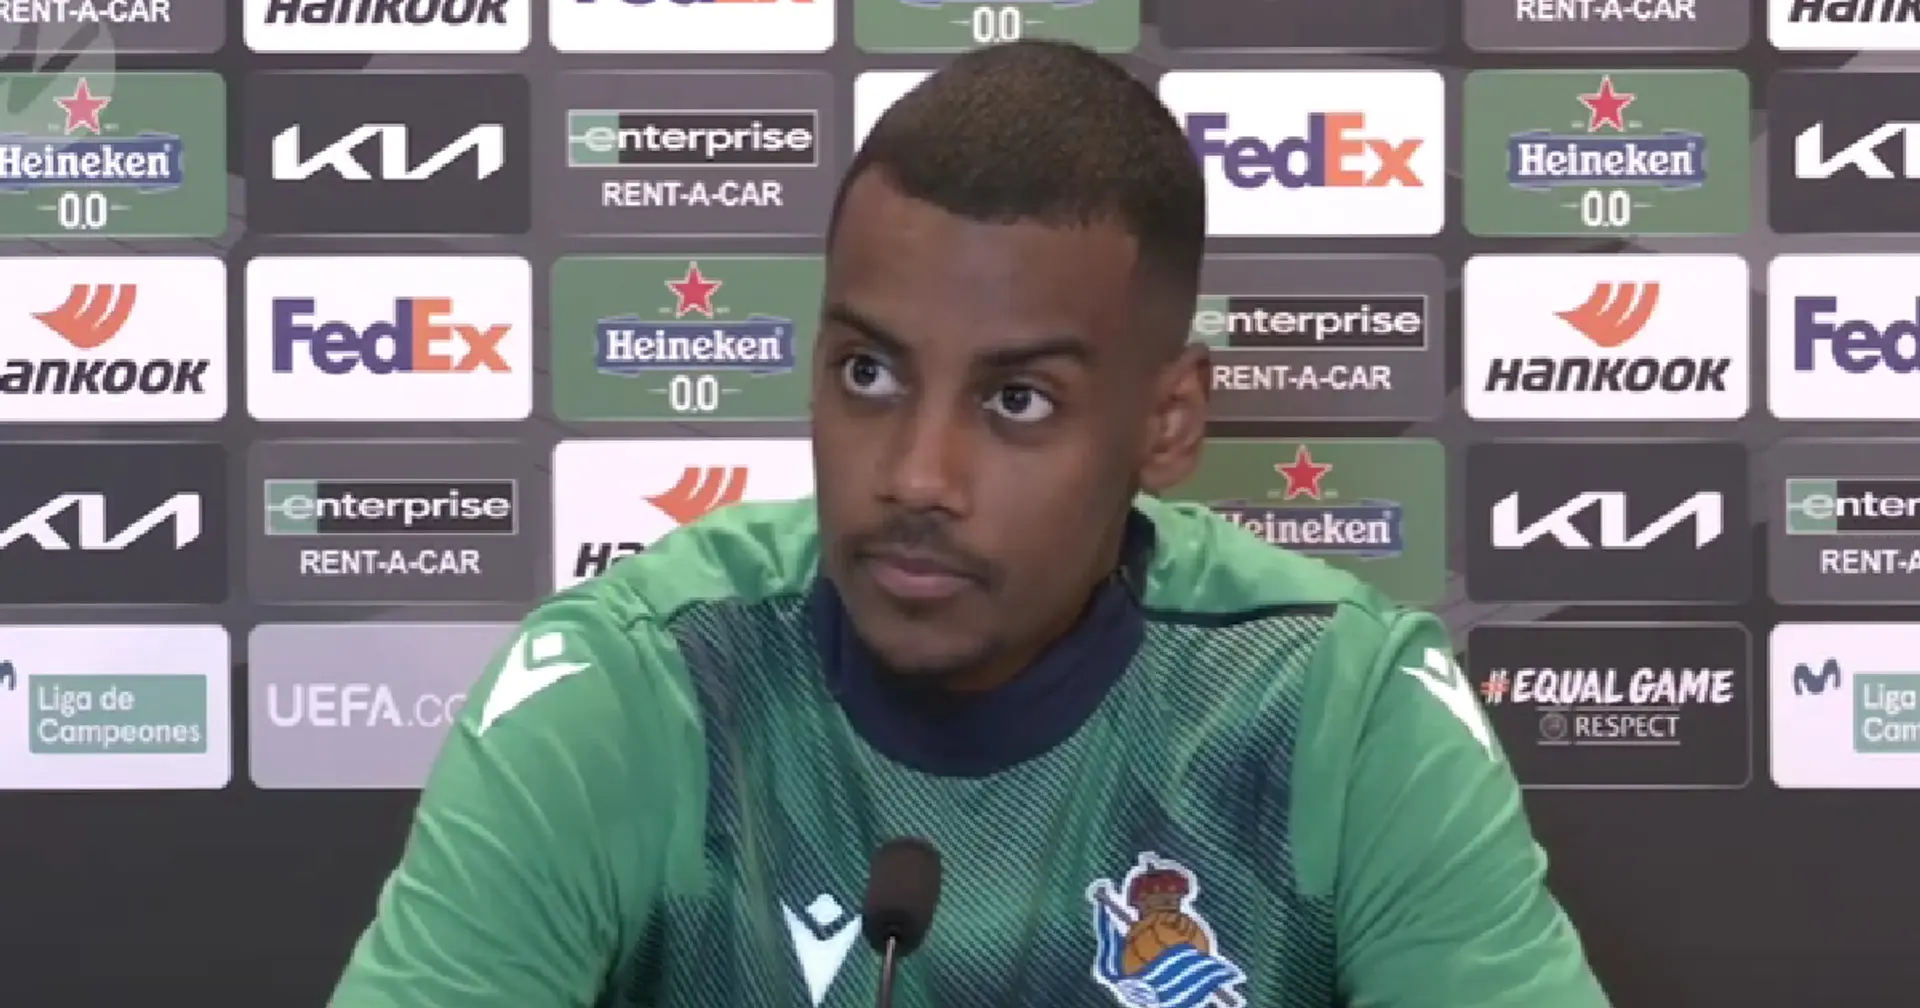 'You have to be calm': Alexander Isak opens up on being linked to Barca